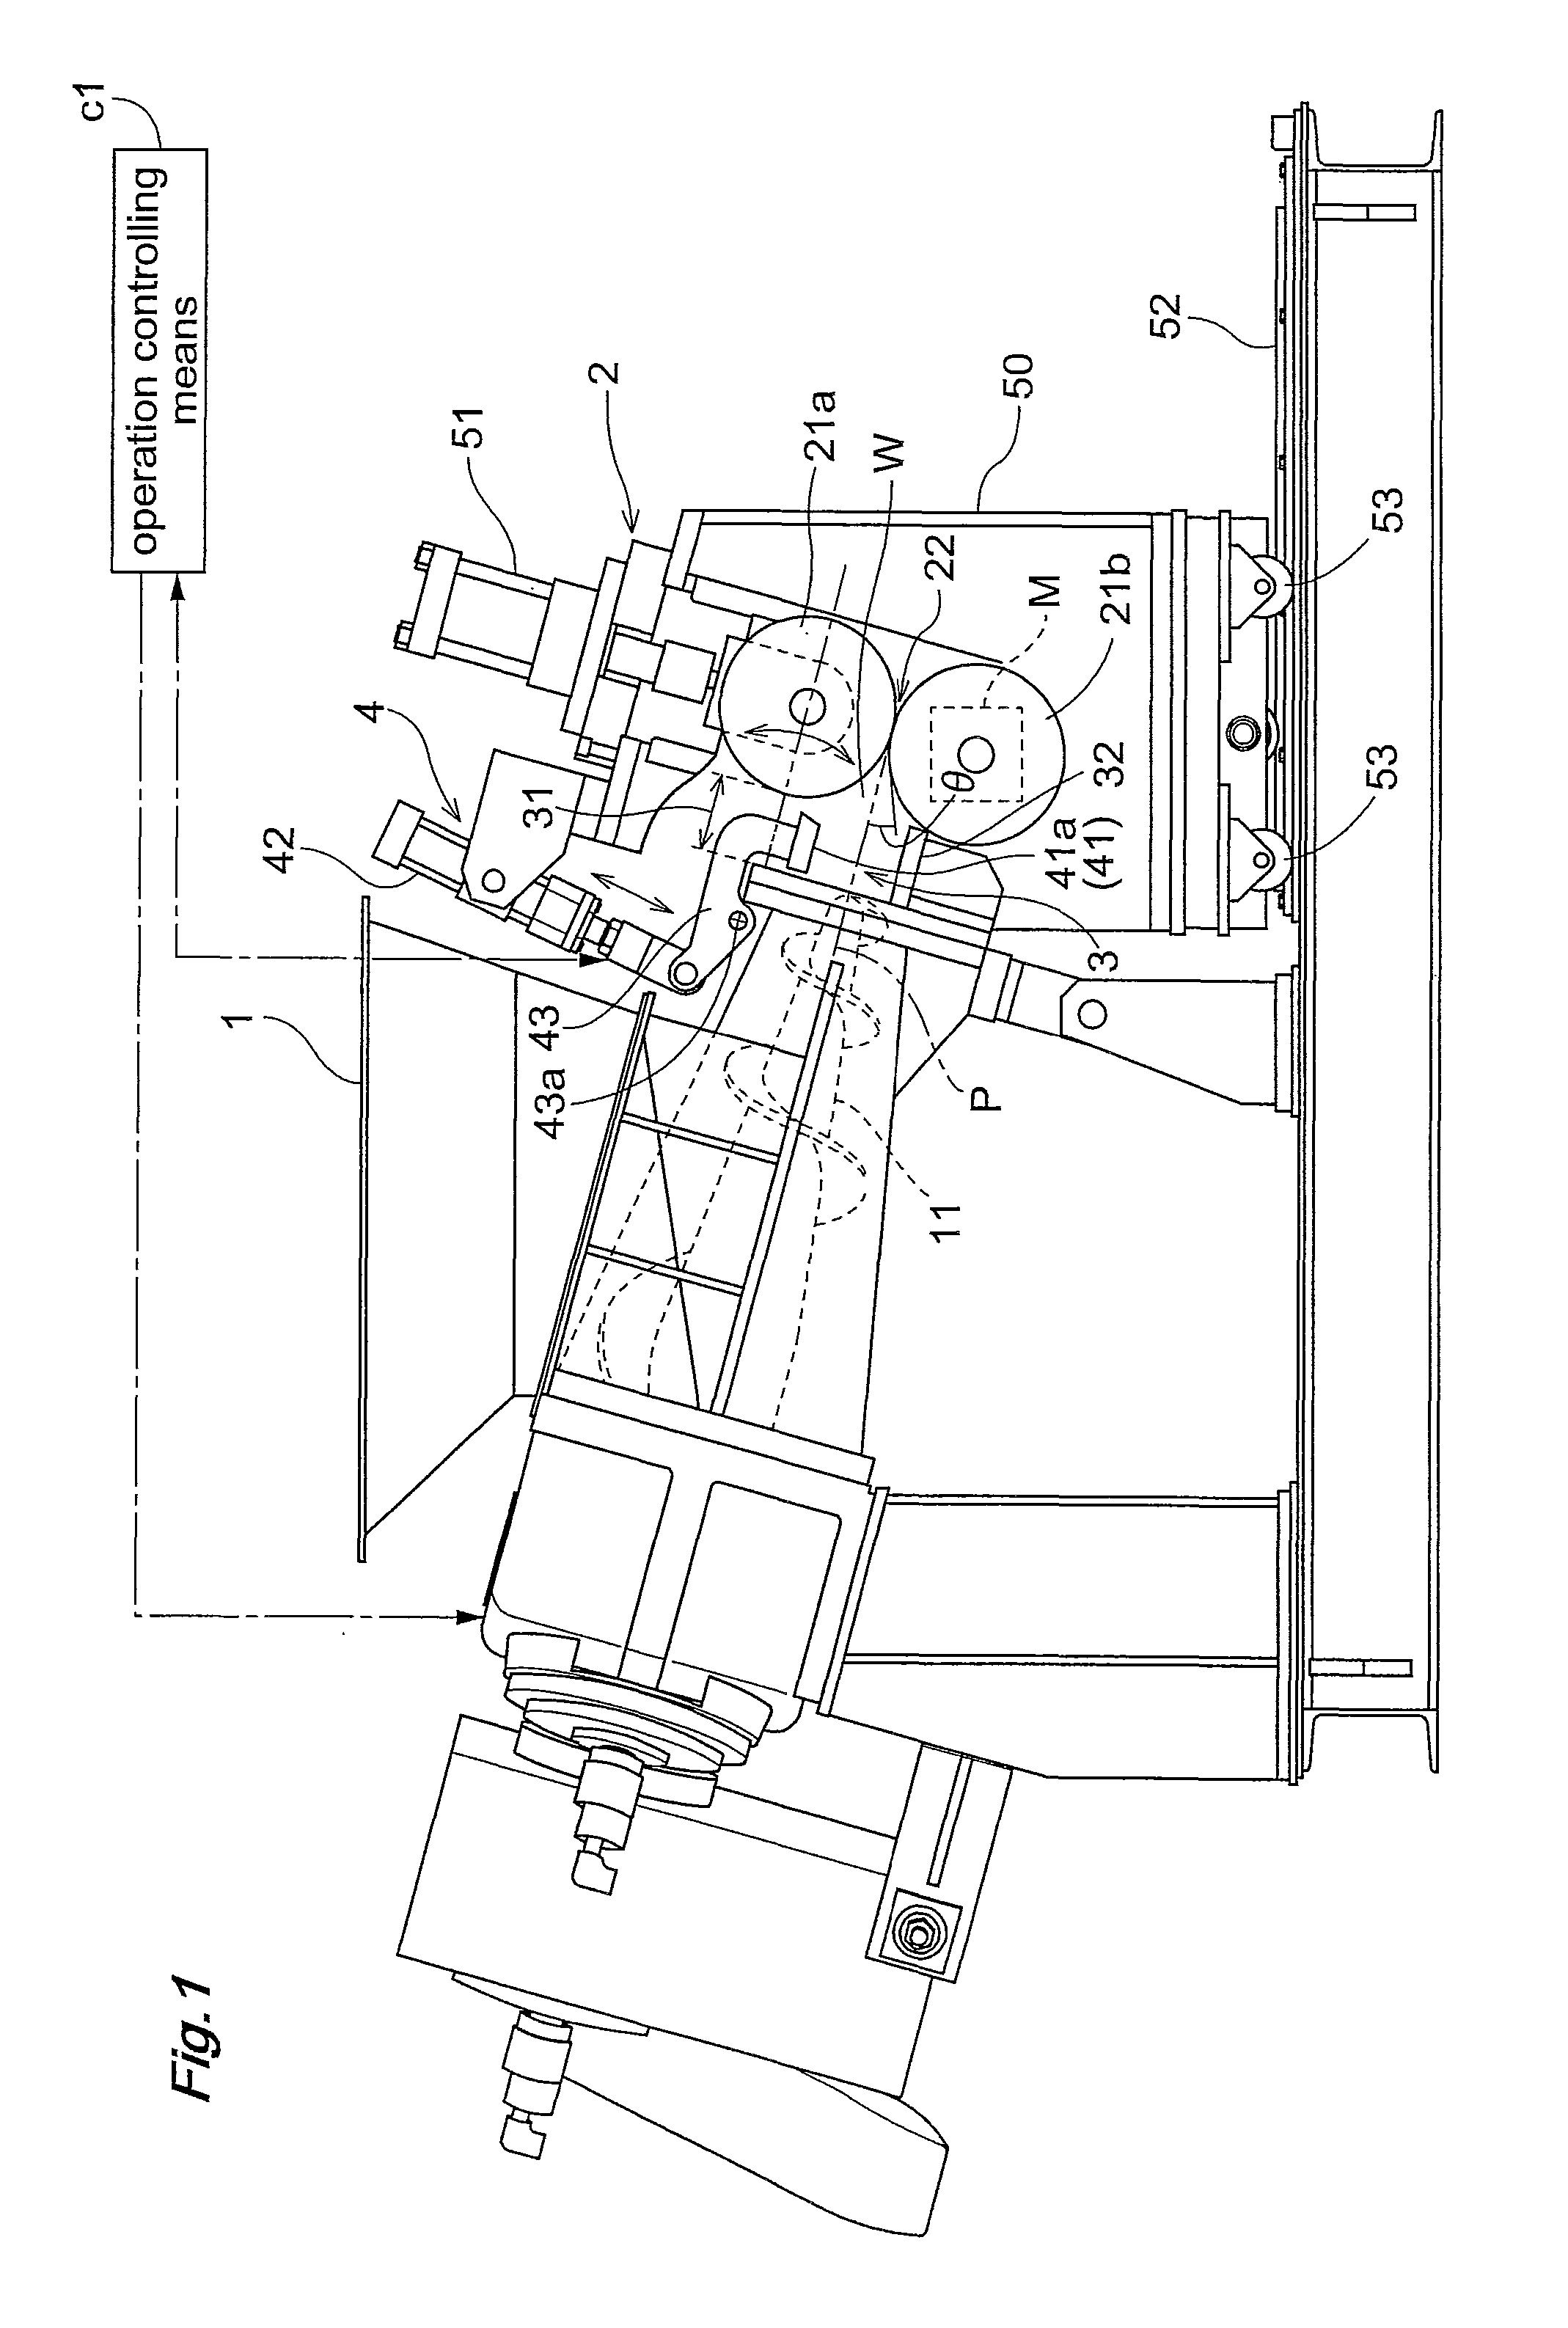 Sheet forming device